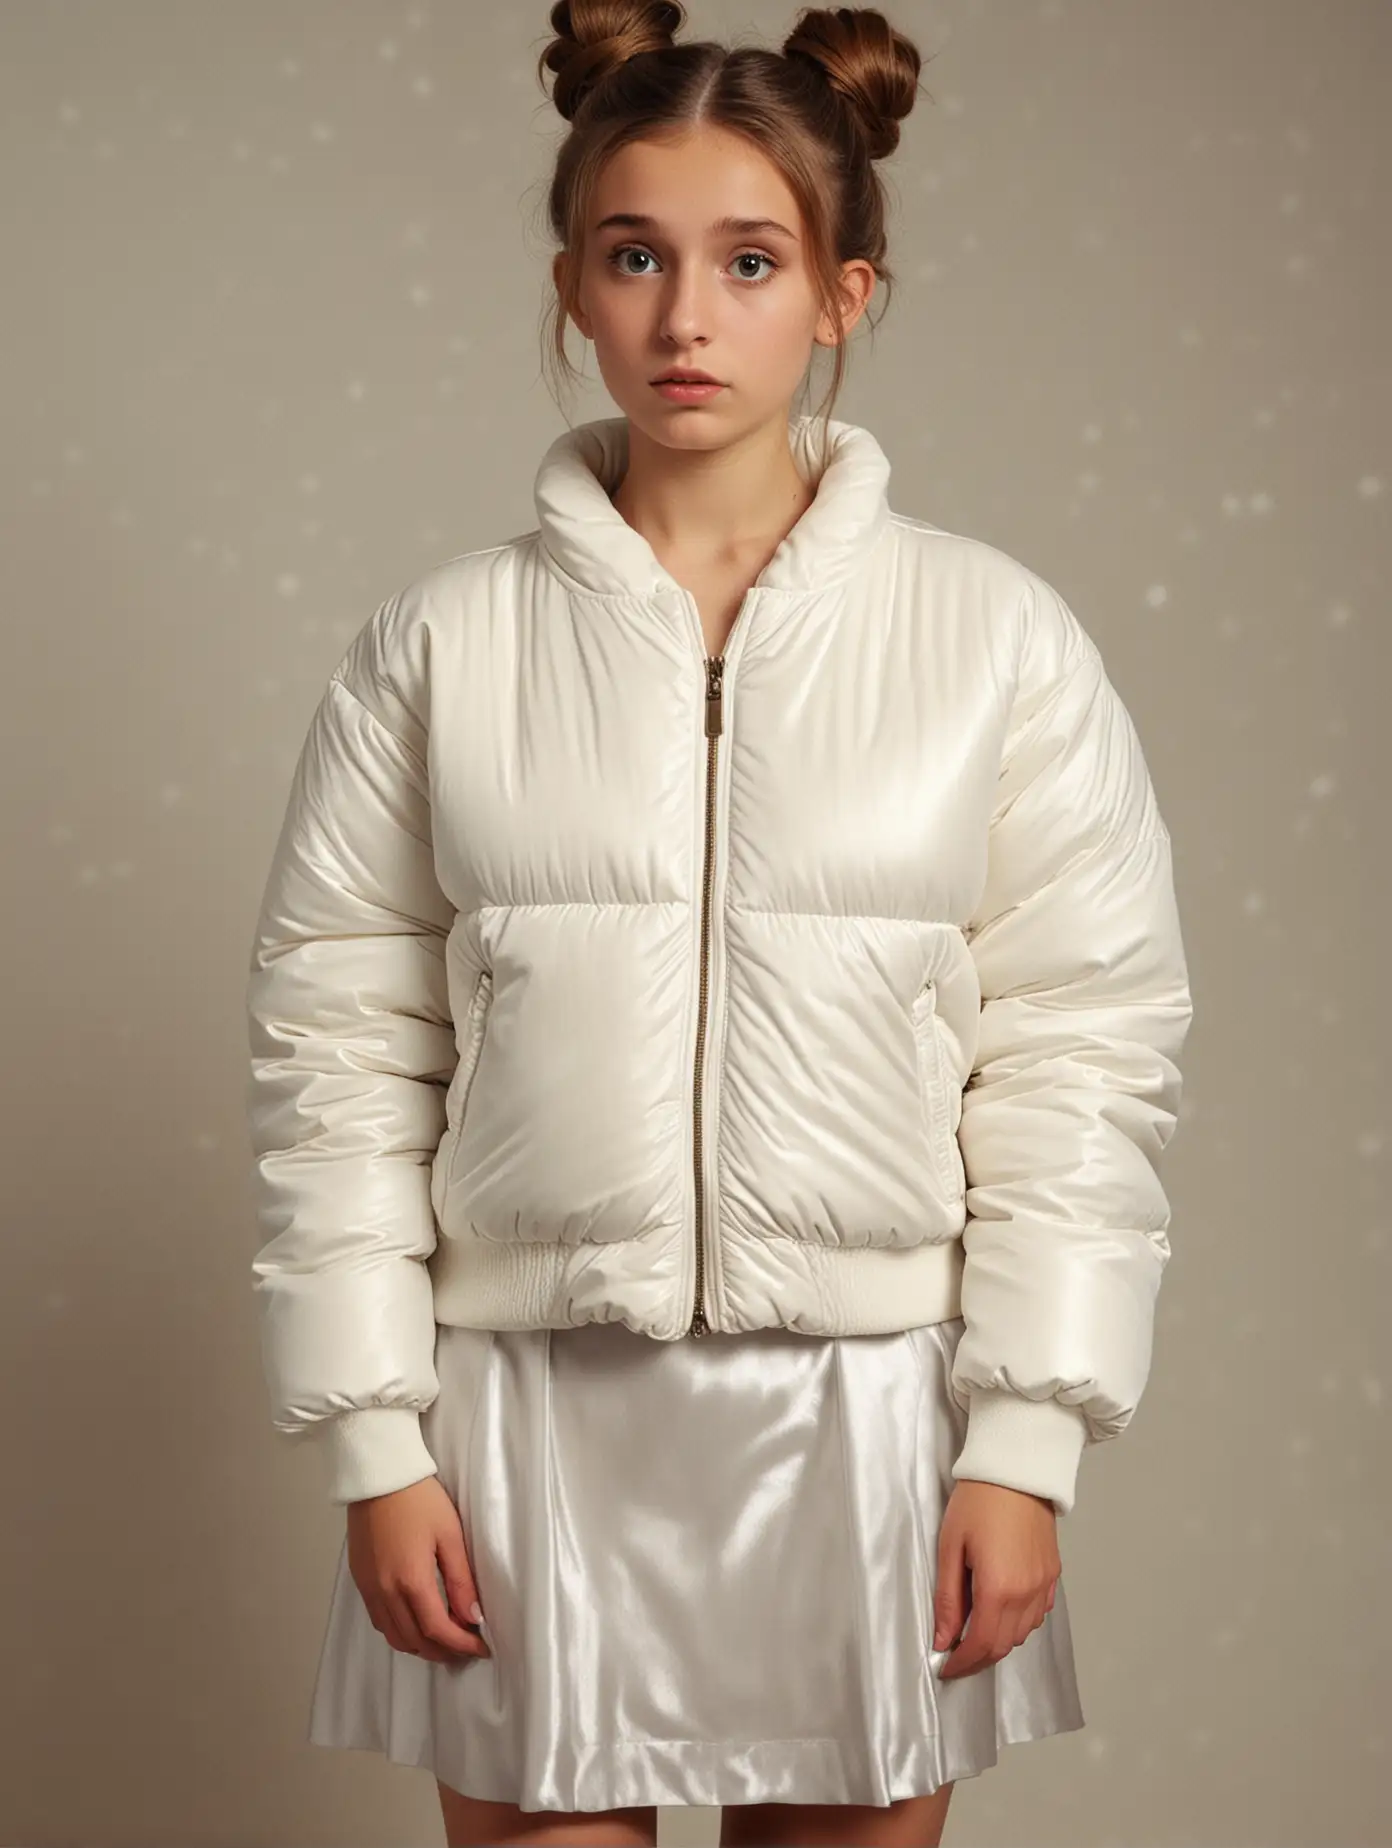 Scared-Teenage-Girl-in-White-Puffer-Jacket-and-Satin-Skirt